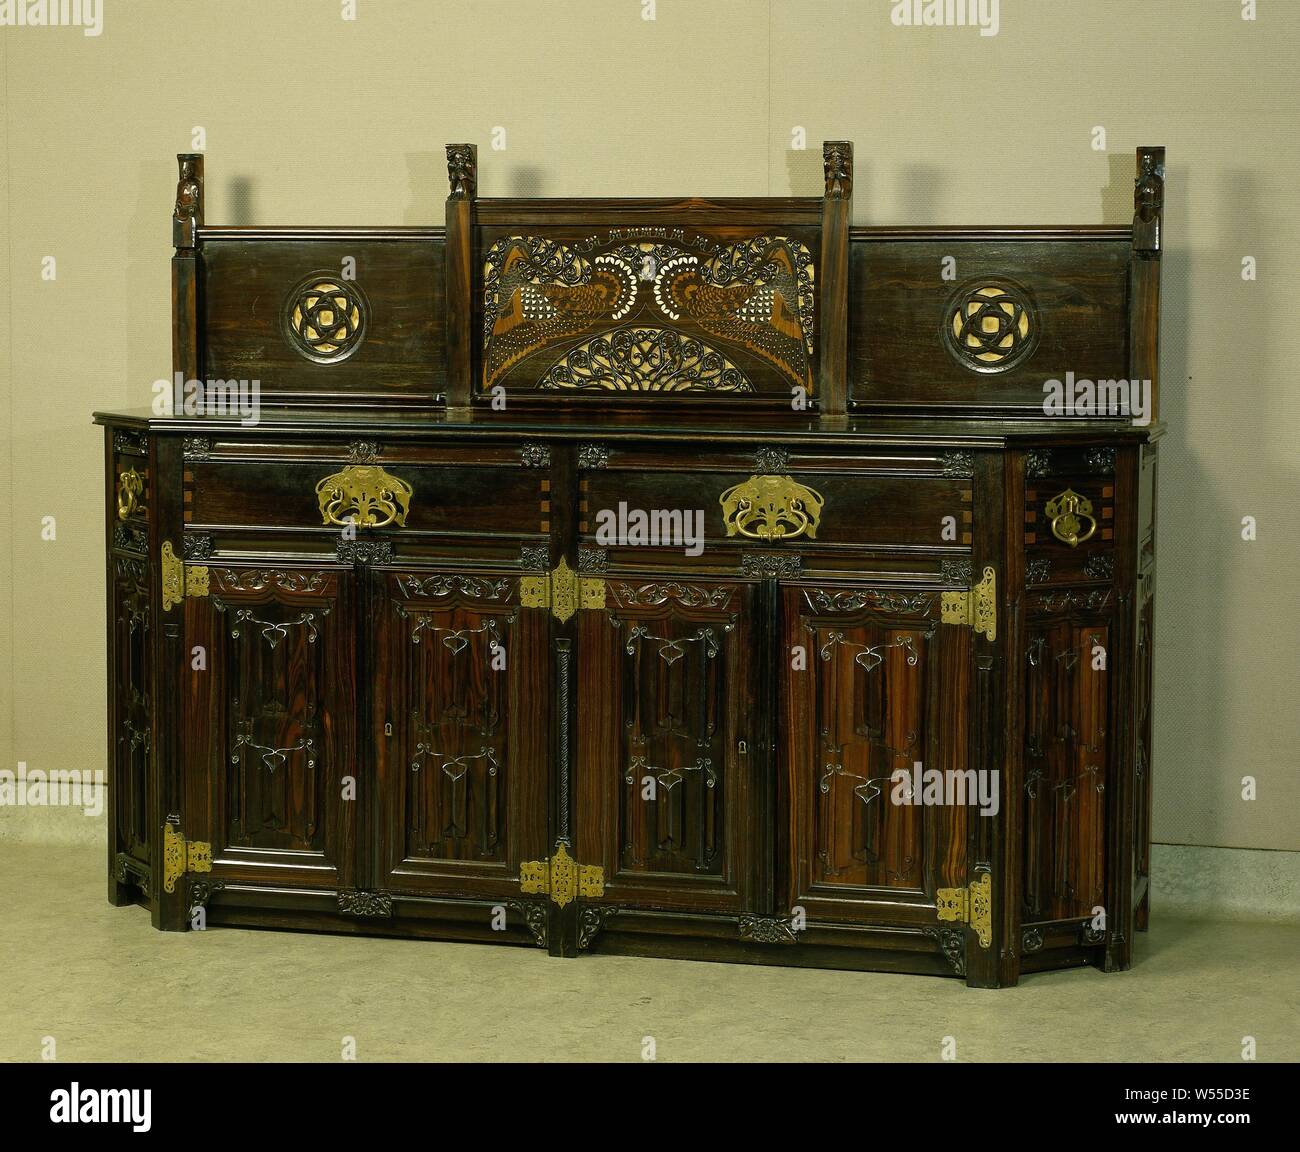 Buffet with drawers and doors decorated with letter panels and other gothic decorations. With carved monogram DVS, Buffet with upright of coromandel inlaid with walnut, ivory and brass, the blindwork of oak, with two drawers above four doors and in the corner posts two smaller drawers. Decorated with letter panels and with gothic and other decorative motifs. In the rebellion the carved monogram DVS for Mr. Th.G. Dentz van Schaick., Kunsthandel E.J. van Wisselingh, Amsterdam, c. 1910 - c. 1918, wood (plant material), padouk (wood), mahogany (wood), ivory, leather, brass (alloy), blindwerk Stock Photo